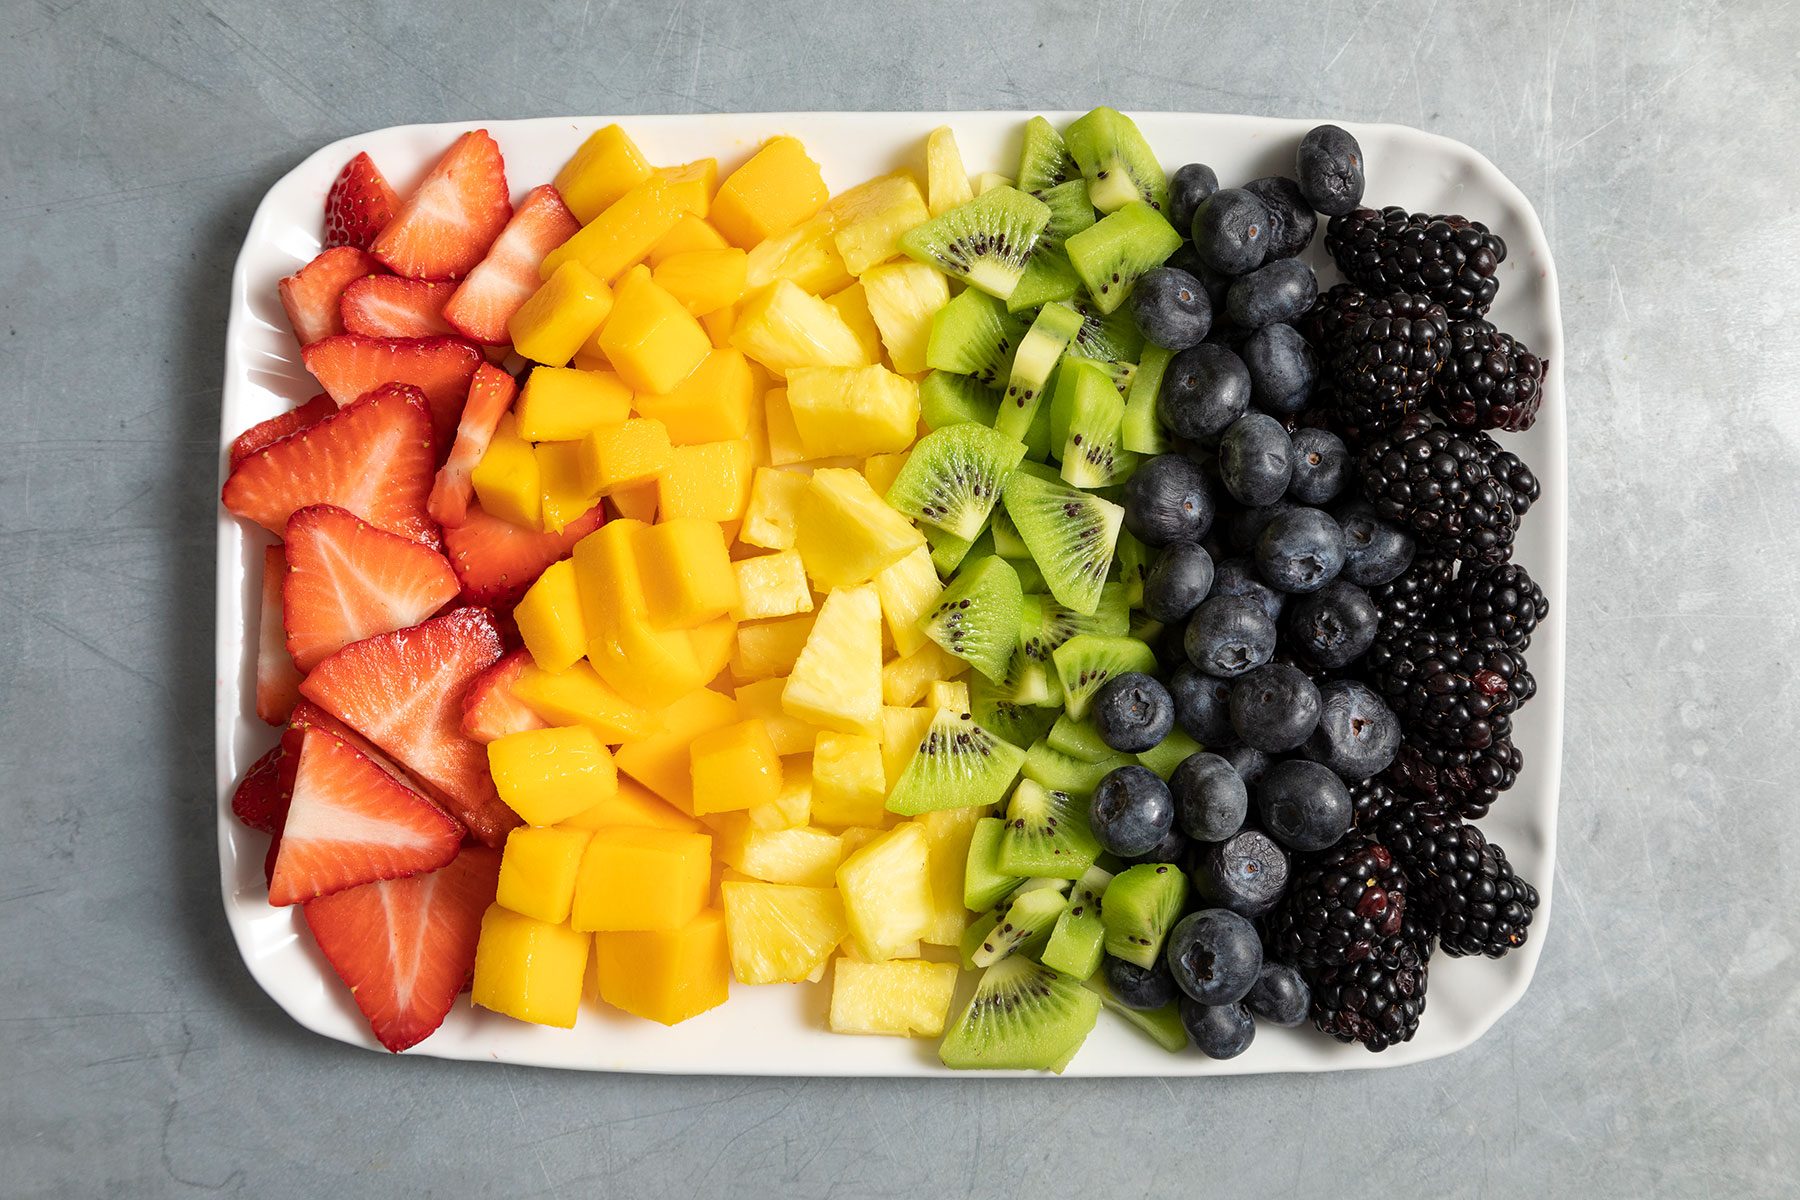 Pieces of fruits lined up on tray